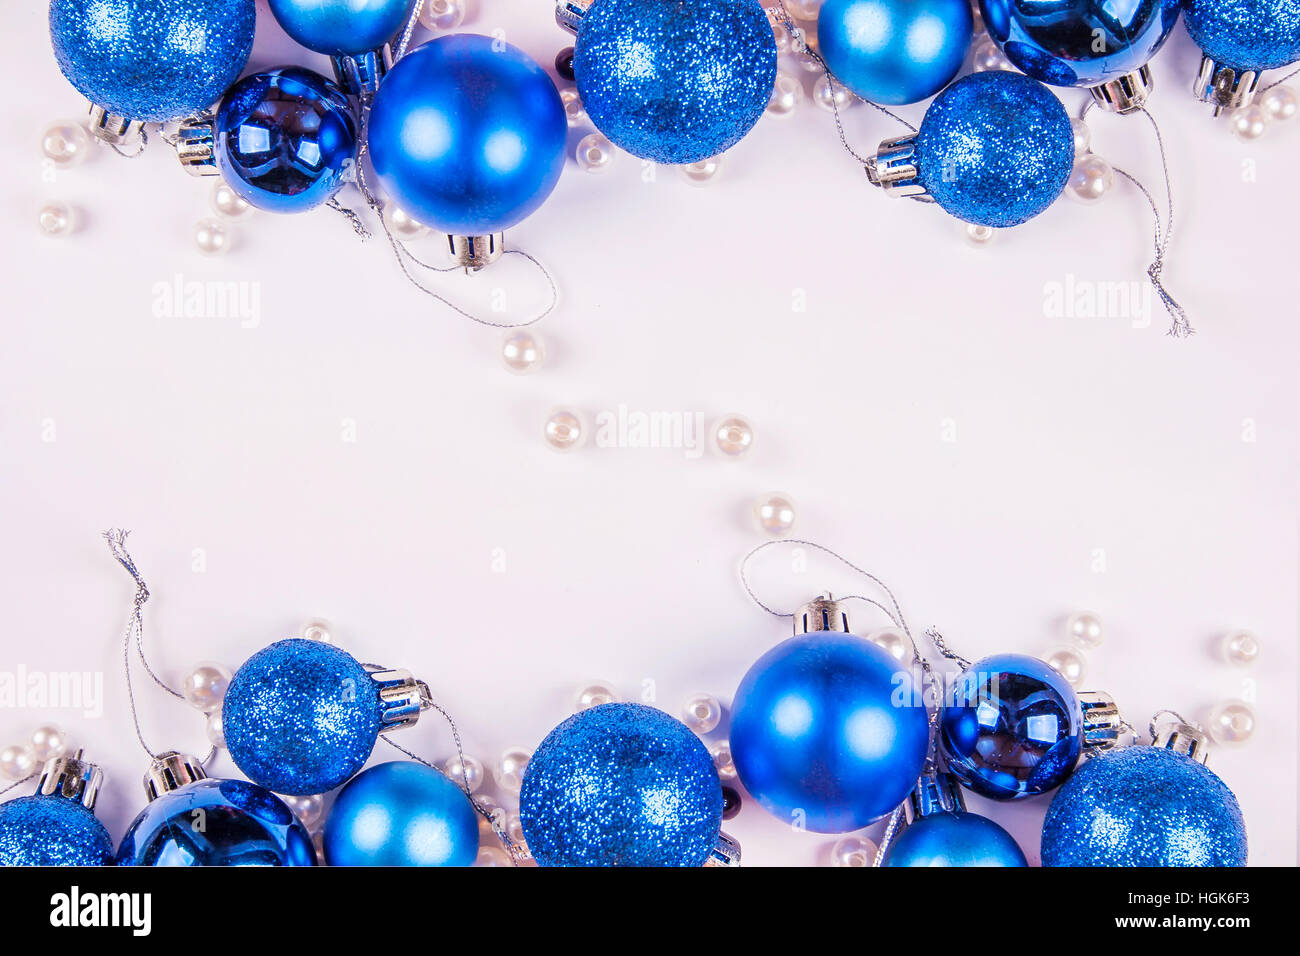 Holiday decorations for Christmas Stock Photo